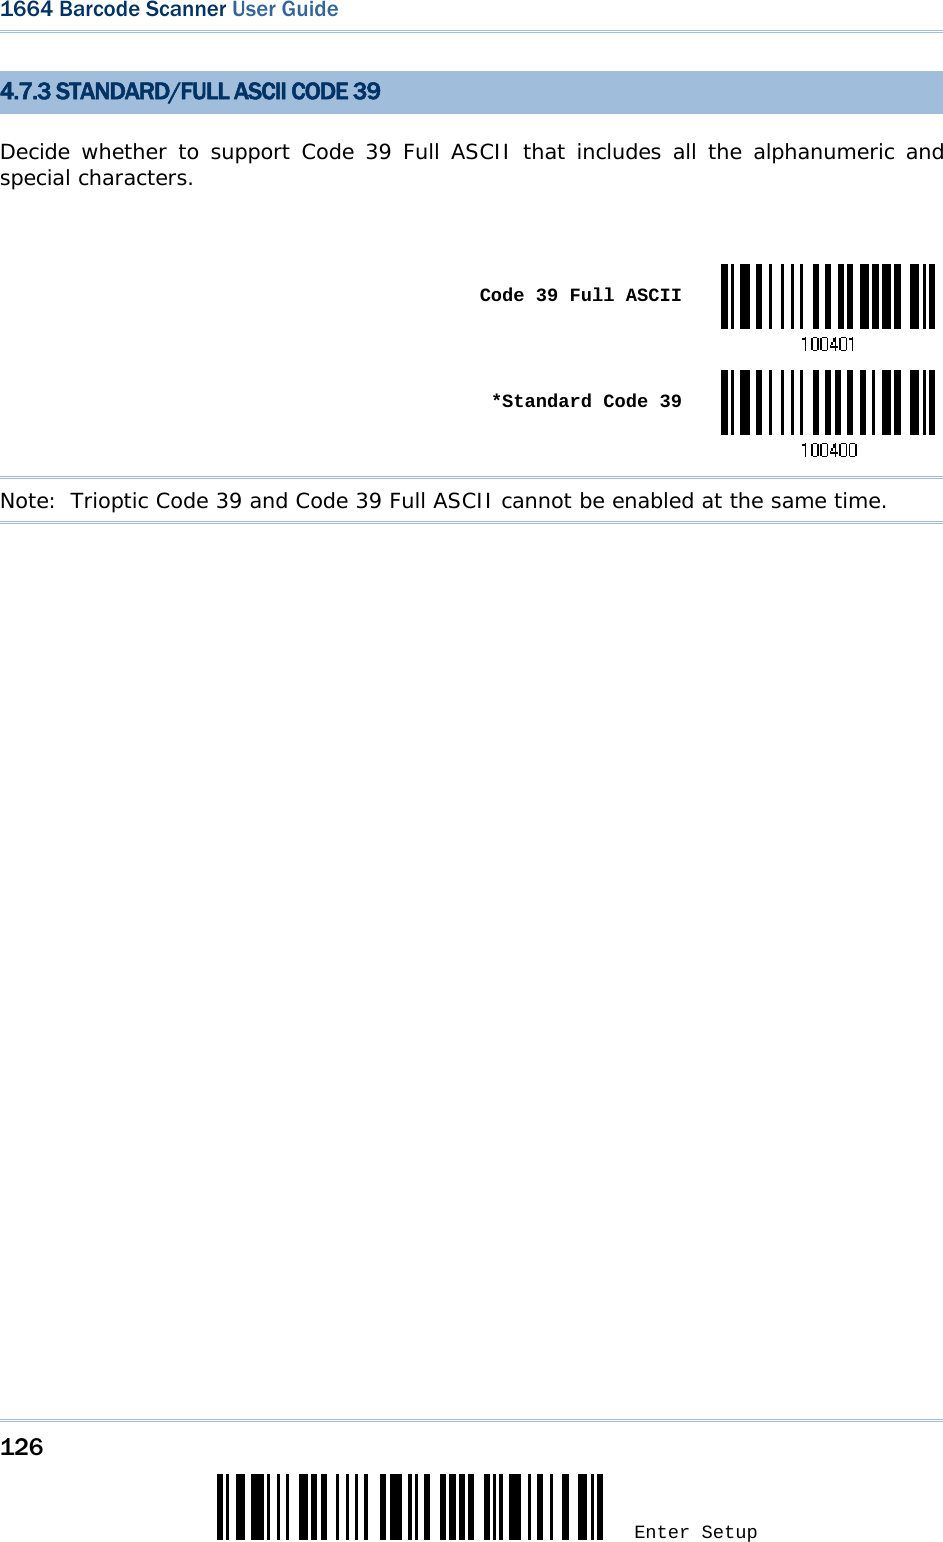 126 Enter Setup 1664 Barcode Scanner User Guide  4.7.3 STANDARD/FULL ASCII CODE 39 Decide whether to support Code 39 Full ASCII that includes all the alphanumeric and special characters.   Code 39 Full ASCII *Standard Code 39Note:  Trioptic Code 39 and Code 39 Full ASCII cannot be enabled at the same time.                 